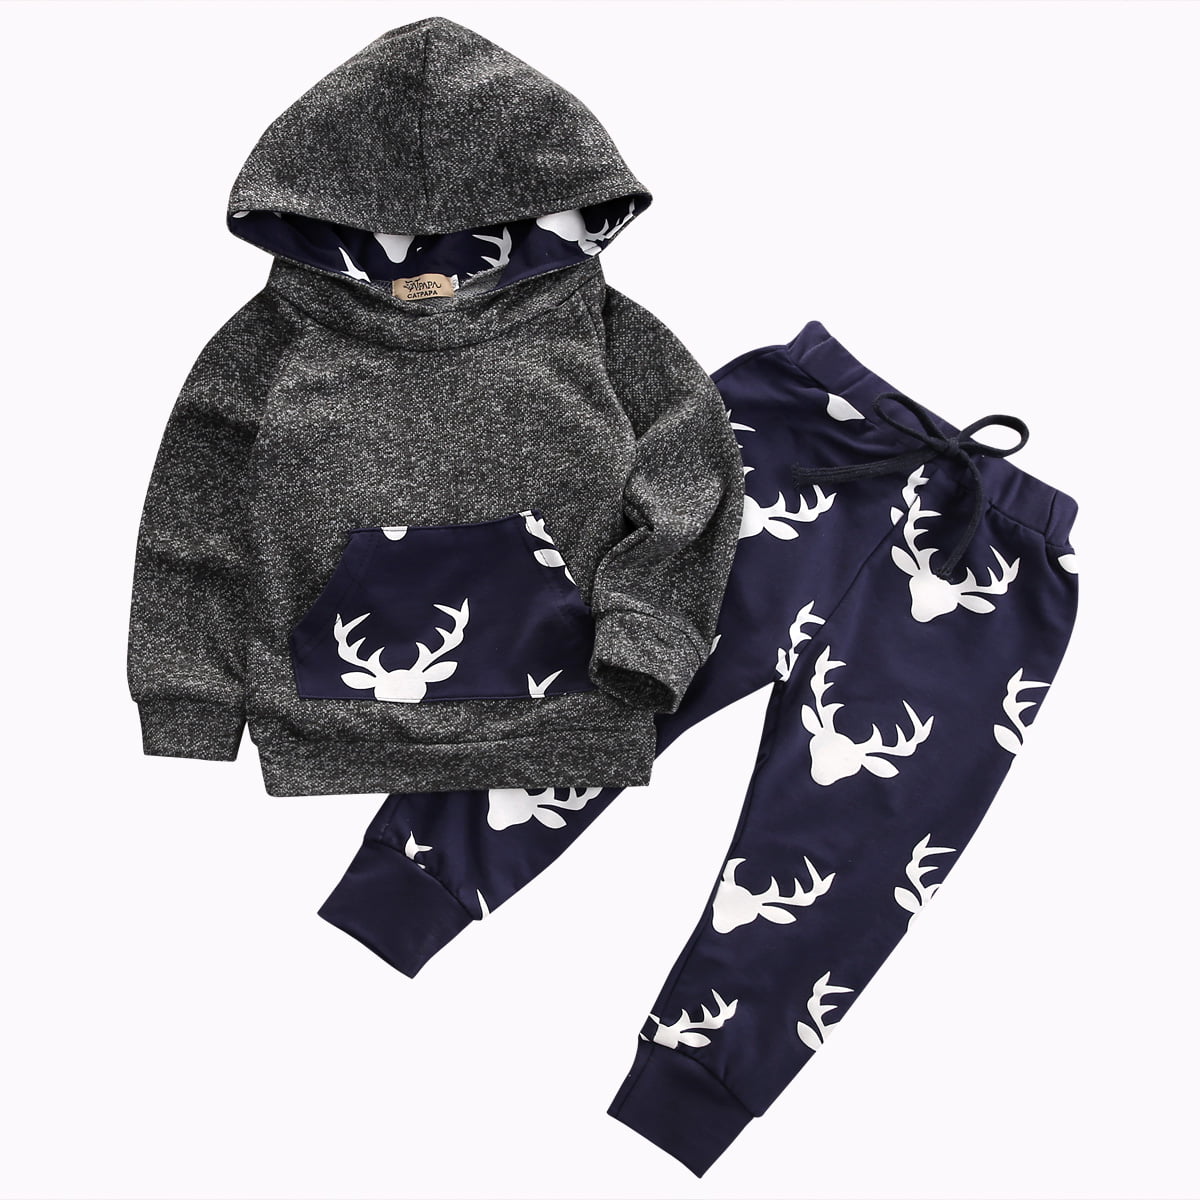 Baby Boy Girl Long Sleeve Hoodie Pullover Sweatshirt Tops Pants Set Toddler Hooded Shirt Coming Home 2PC Outfit Clothes